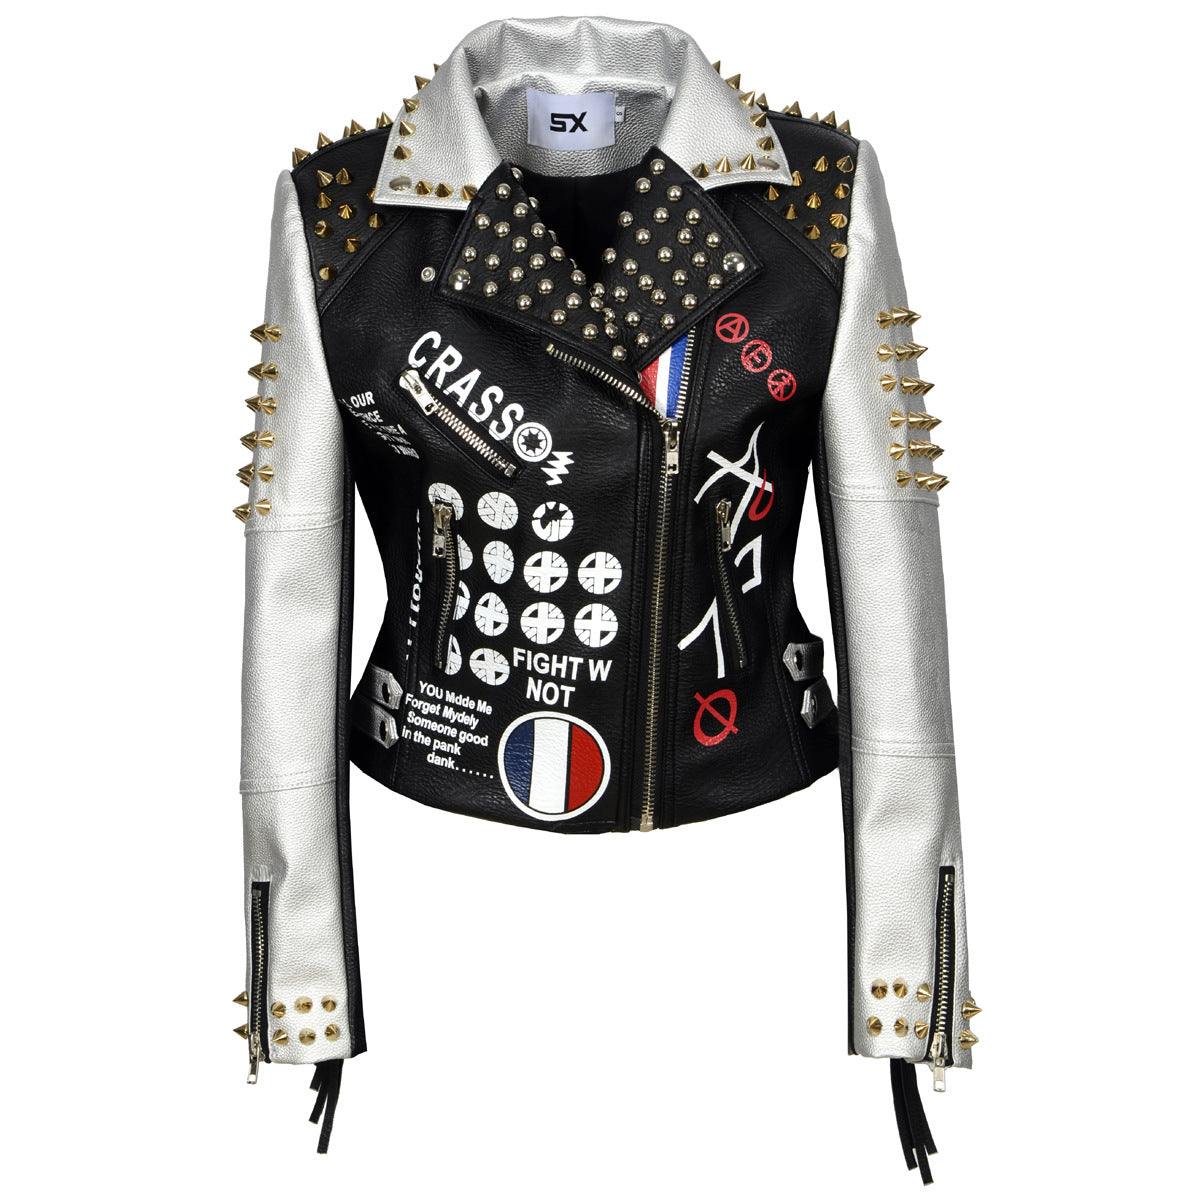 An edgy women's rock graffiti leather jacket adorned with studs and patches, showcasing a rebellious punk style by Maramalive™.